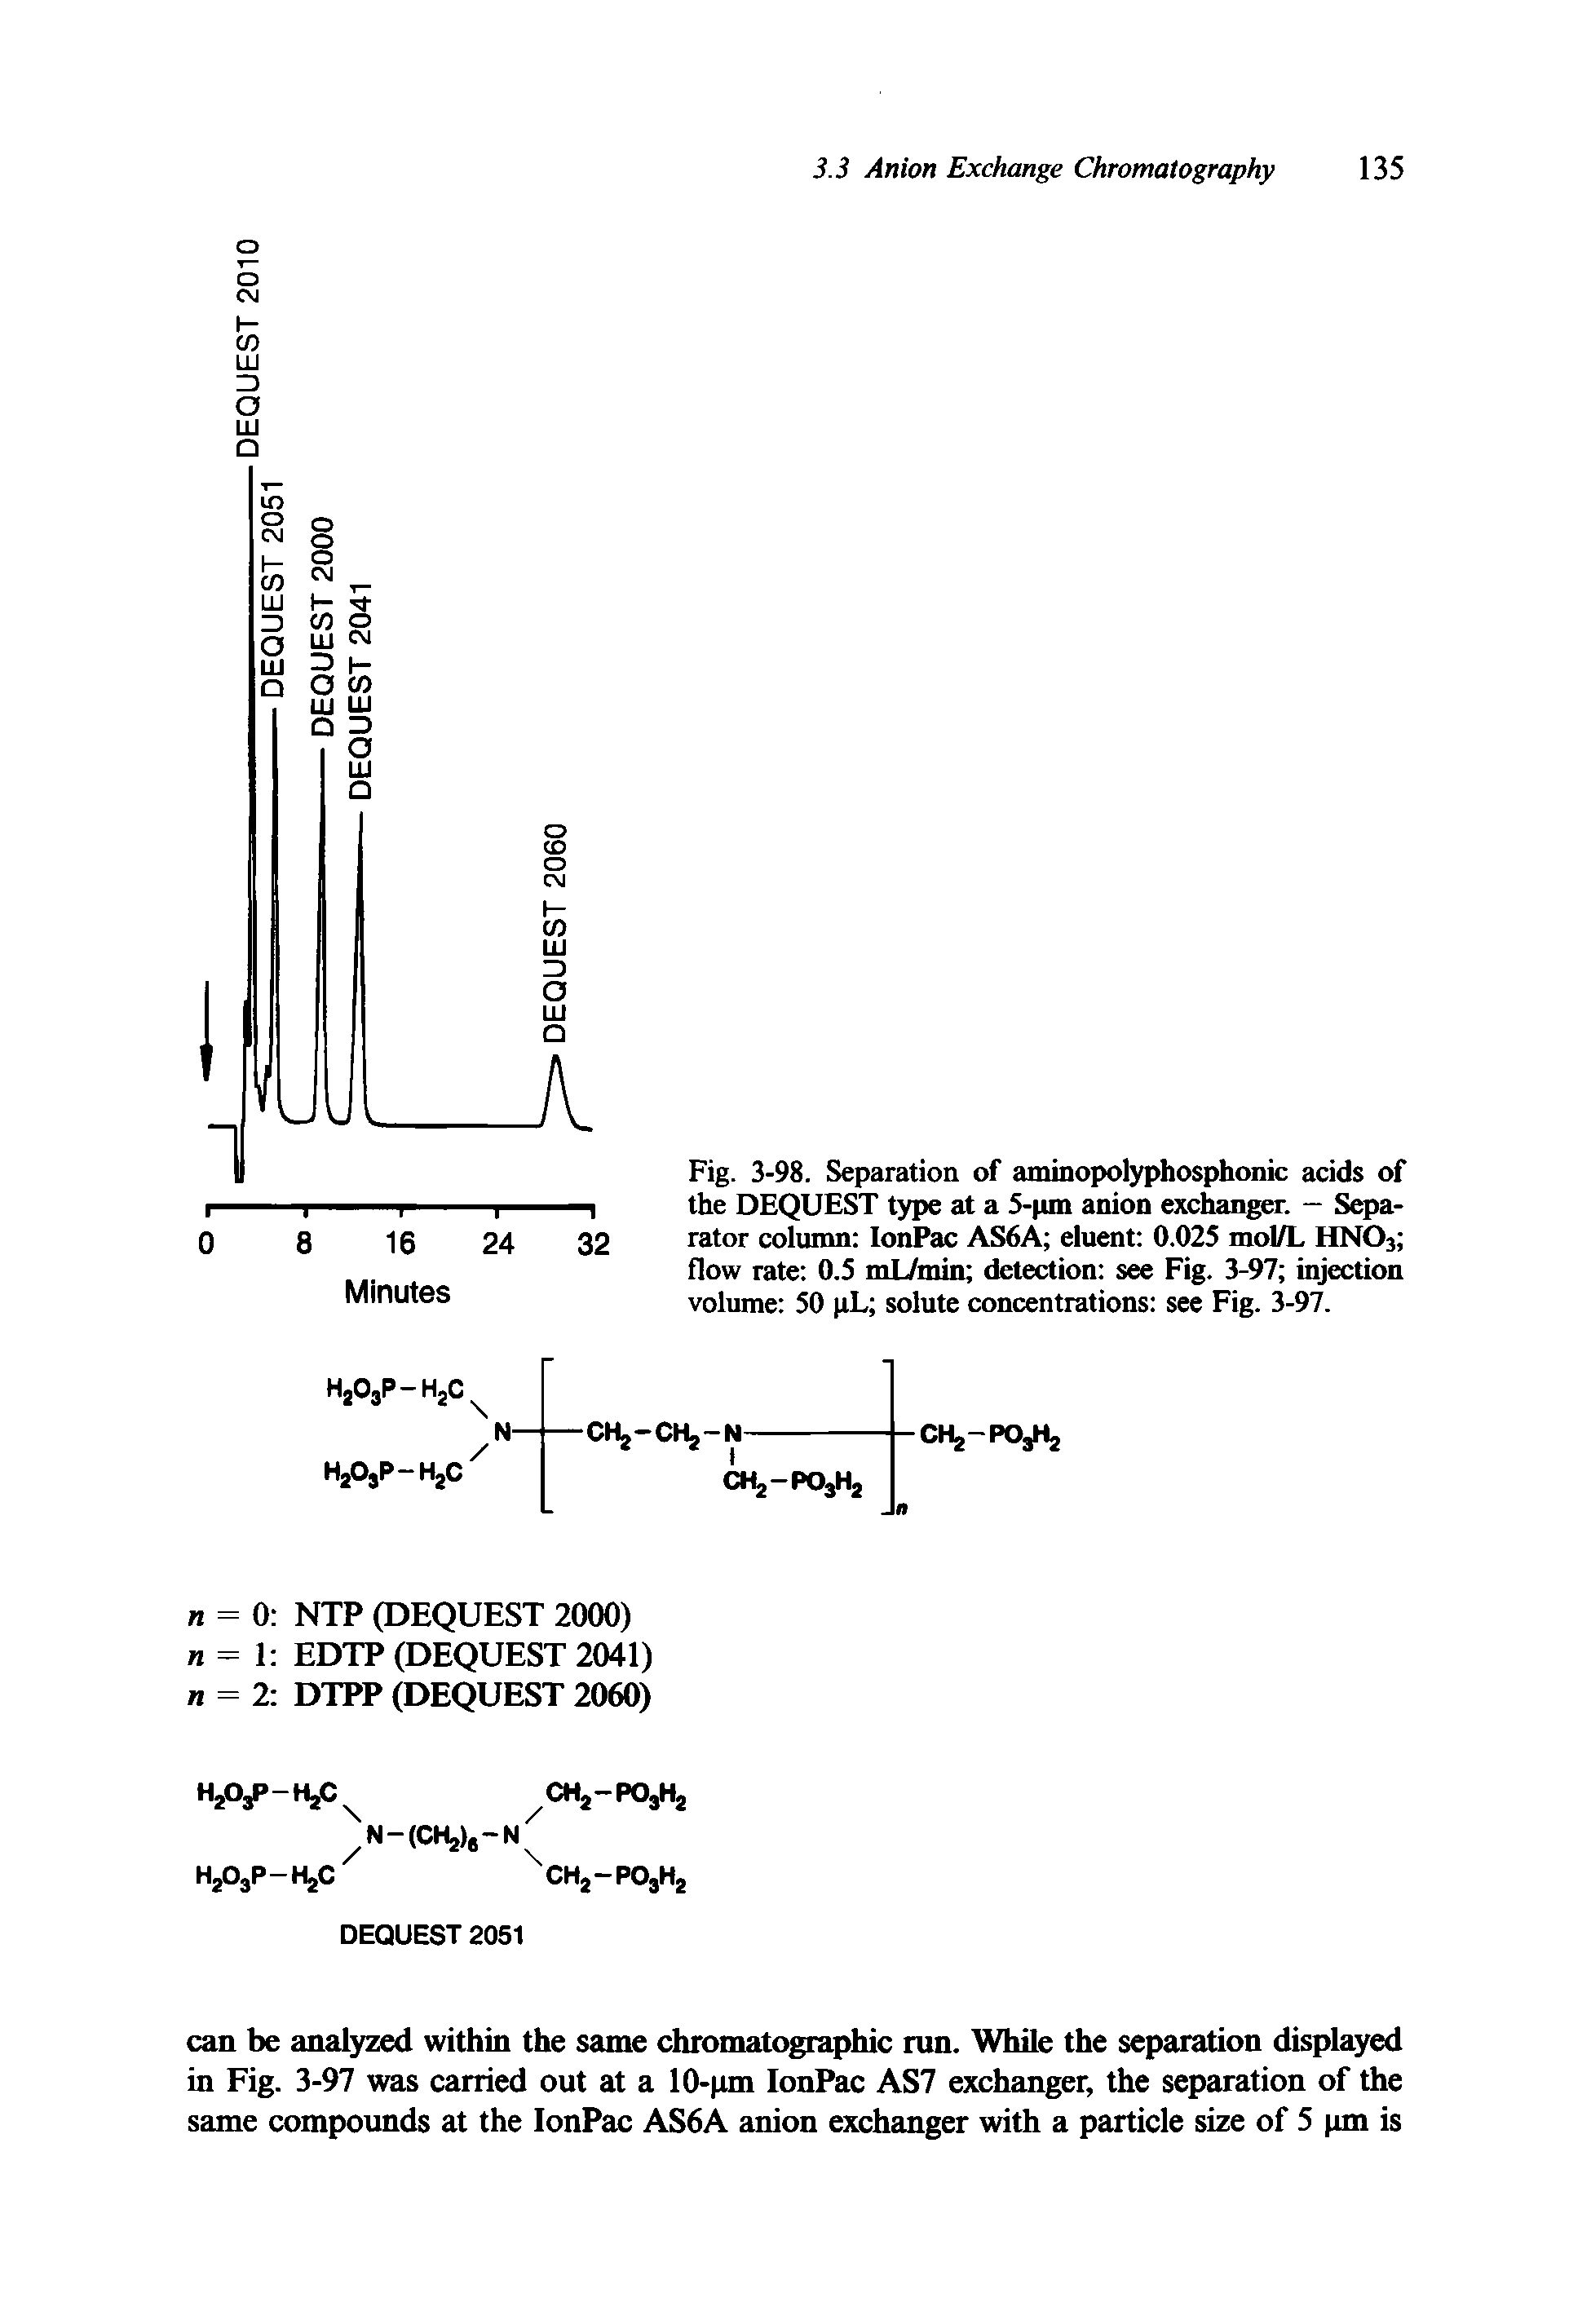 Fig. 3-98. Separation of aminopolyphosphonic acids of the DEQUEST type at a 5-pm anion exchanger. — Separator column IonPac AS6A eluent 0.025 mol/L HN03 flow rate 0.5 mL/min detection see Fig. 3-97 injection volume 50 pL solute concentrations see Fig. 3-97.